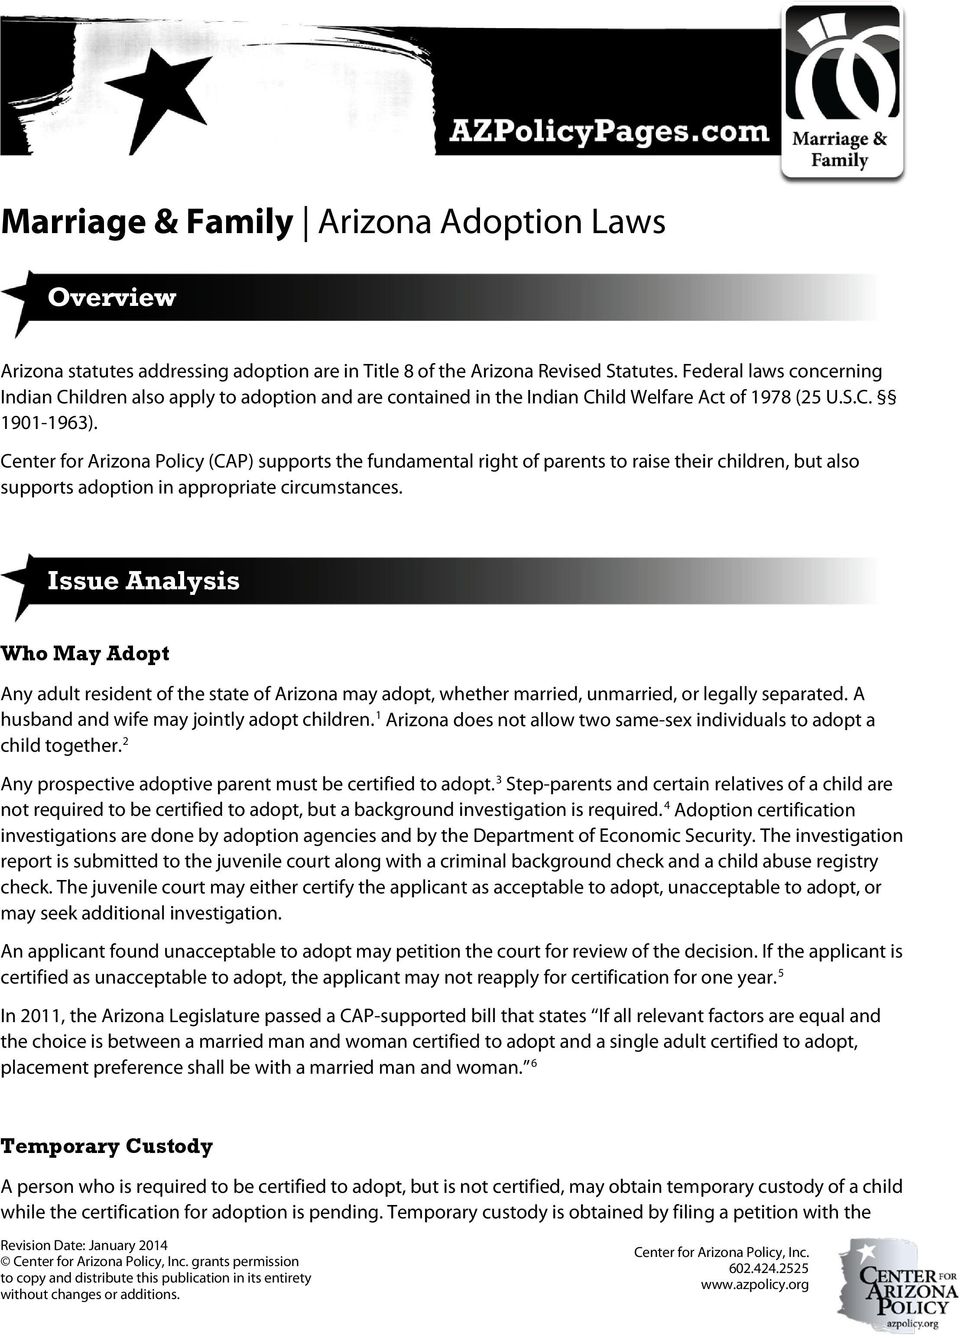 Center for Arizona Policy (CAP) supports the fundamental right of parents to raise their children, but also supports adoption in appropriate circumstances.